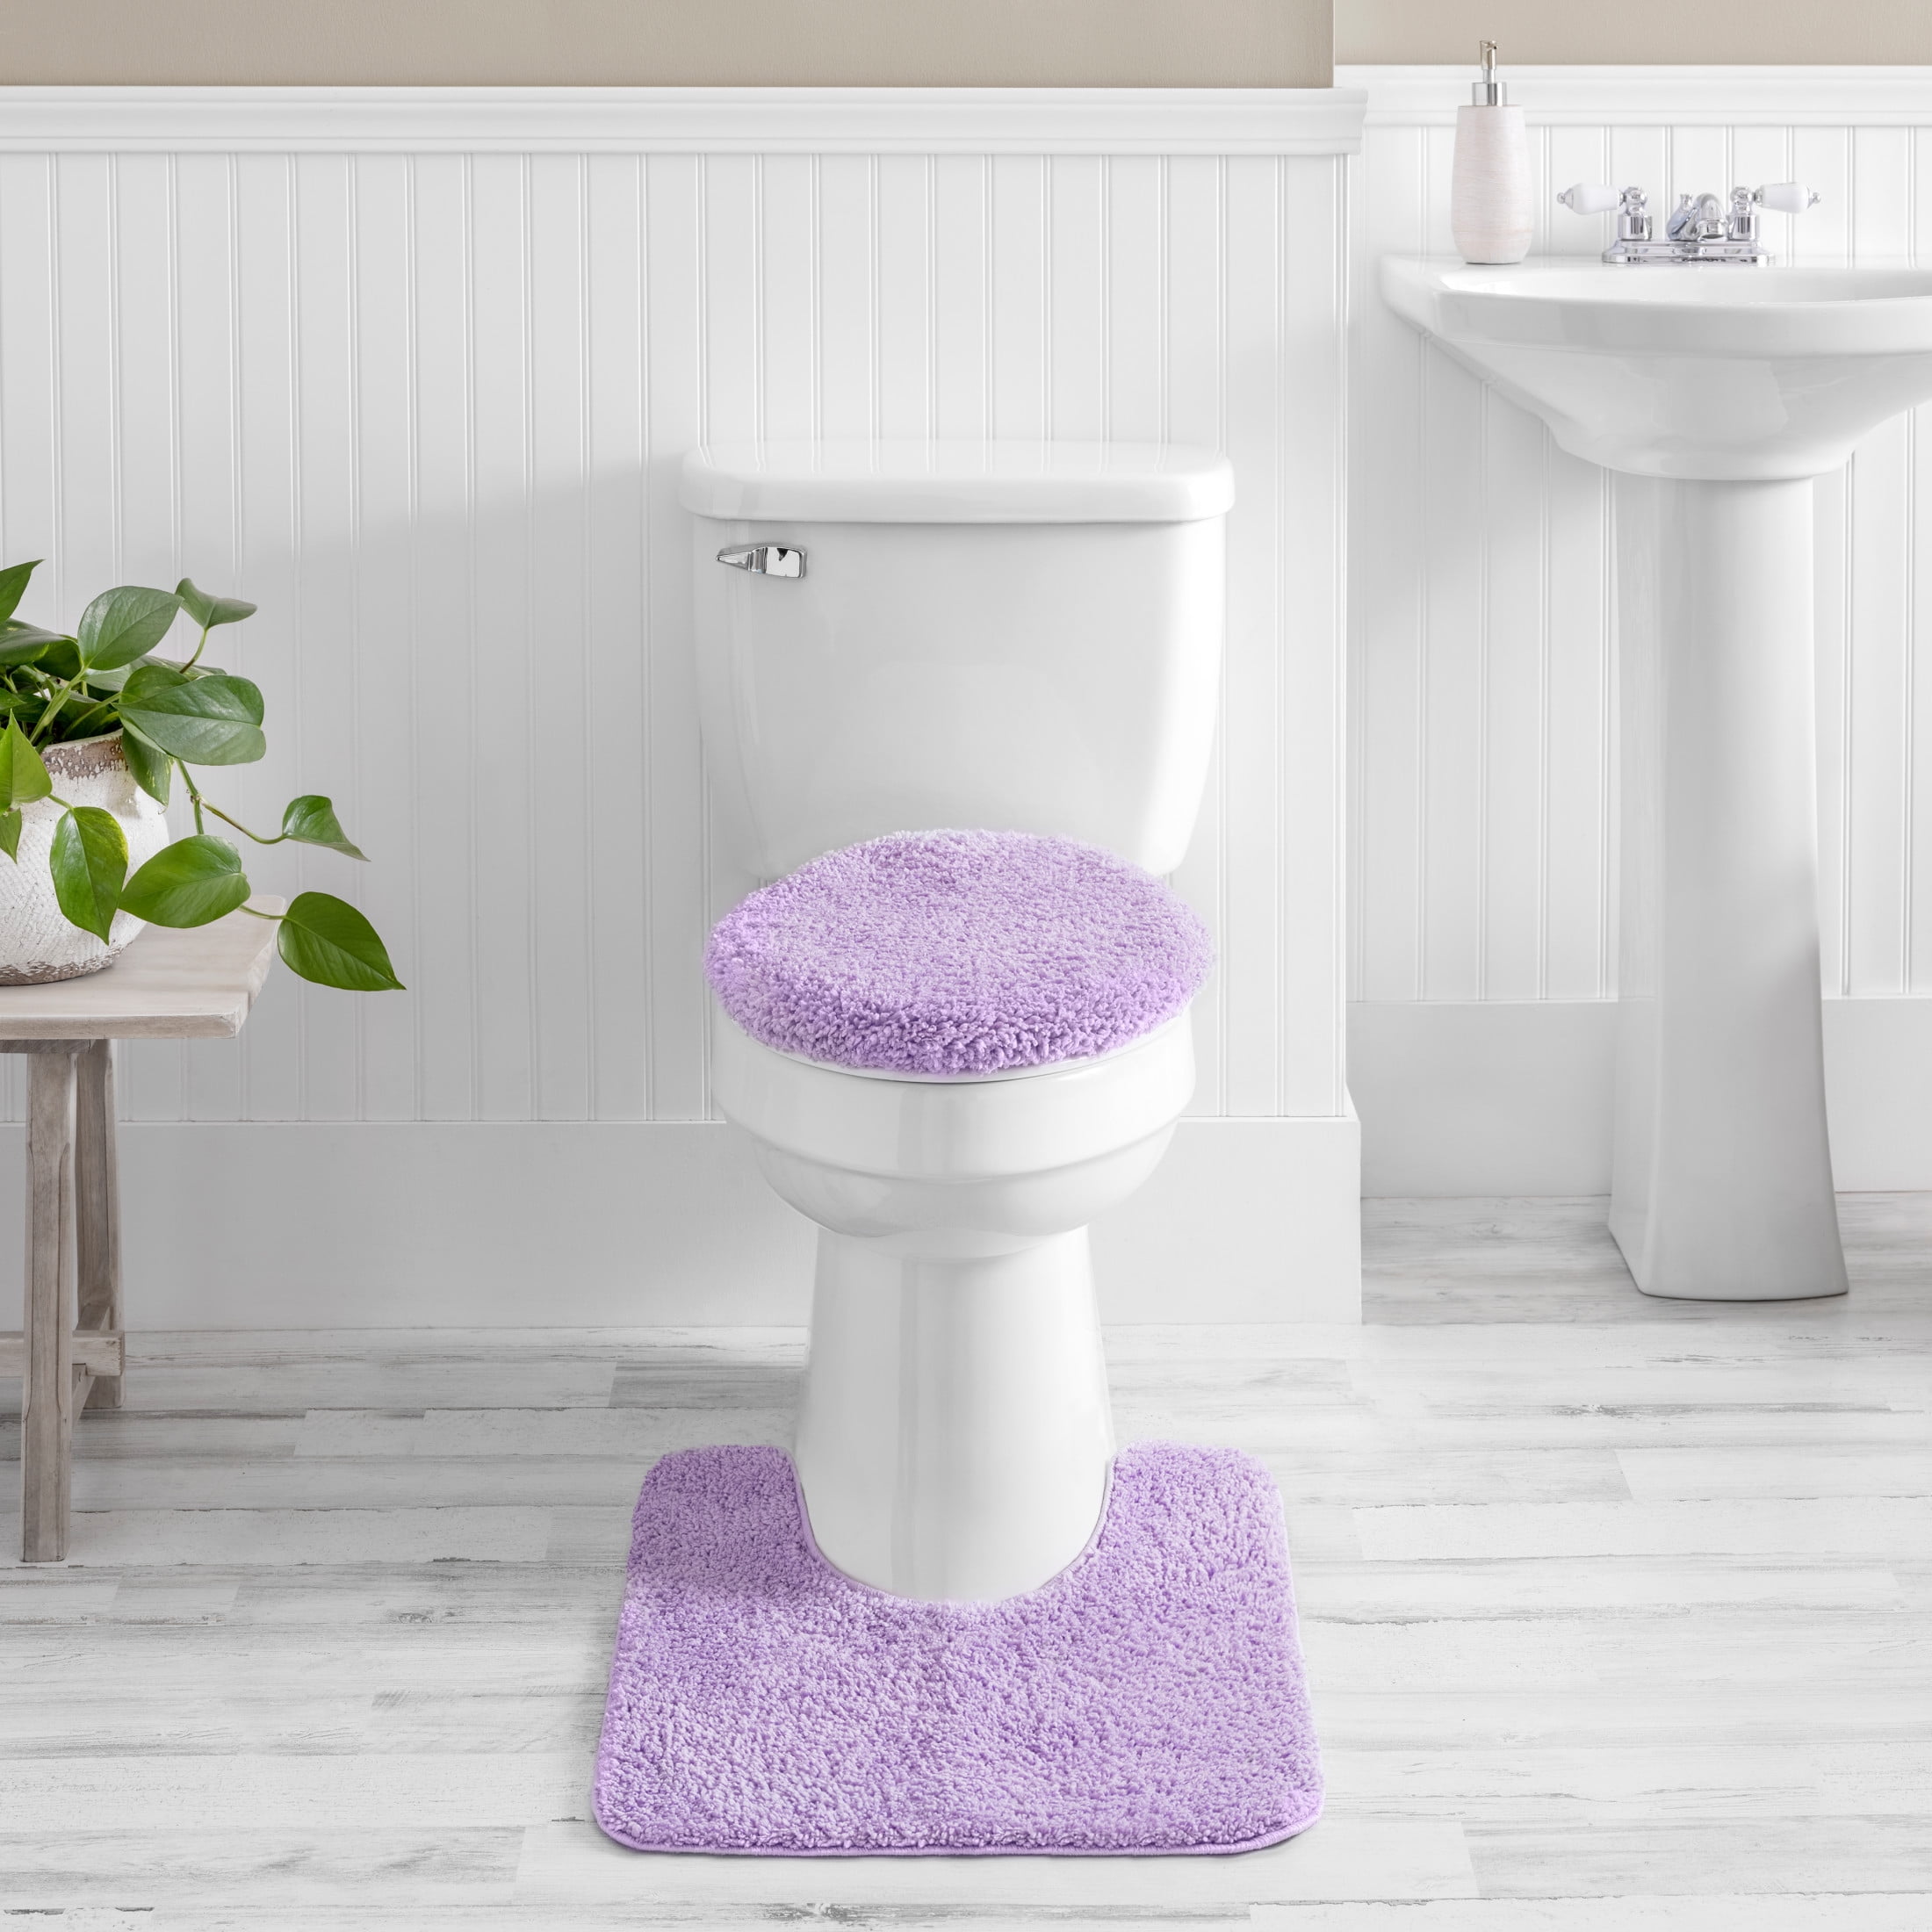 Mainstays Basic Purple Polyester 19 x 22 Toilet Lid Cover